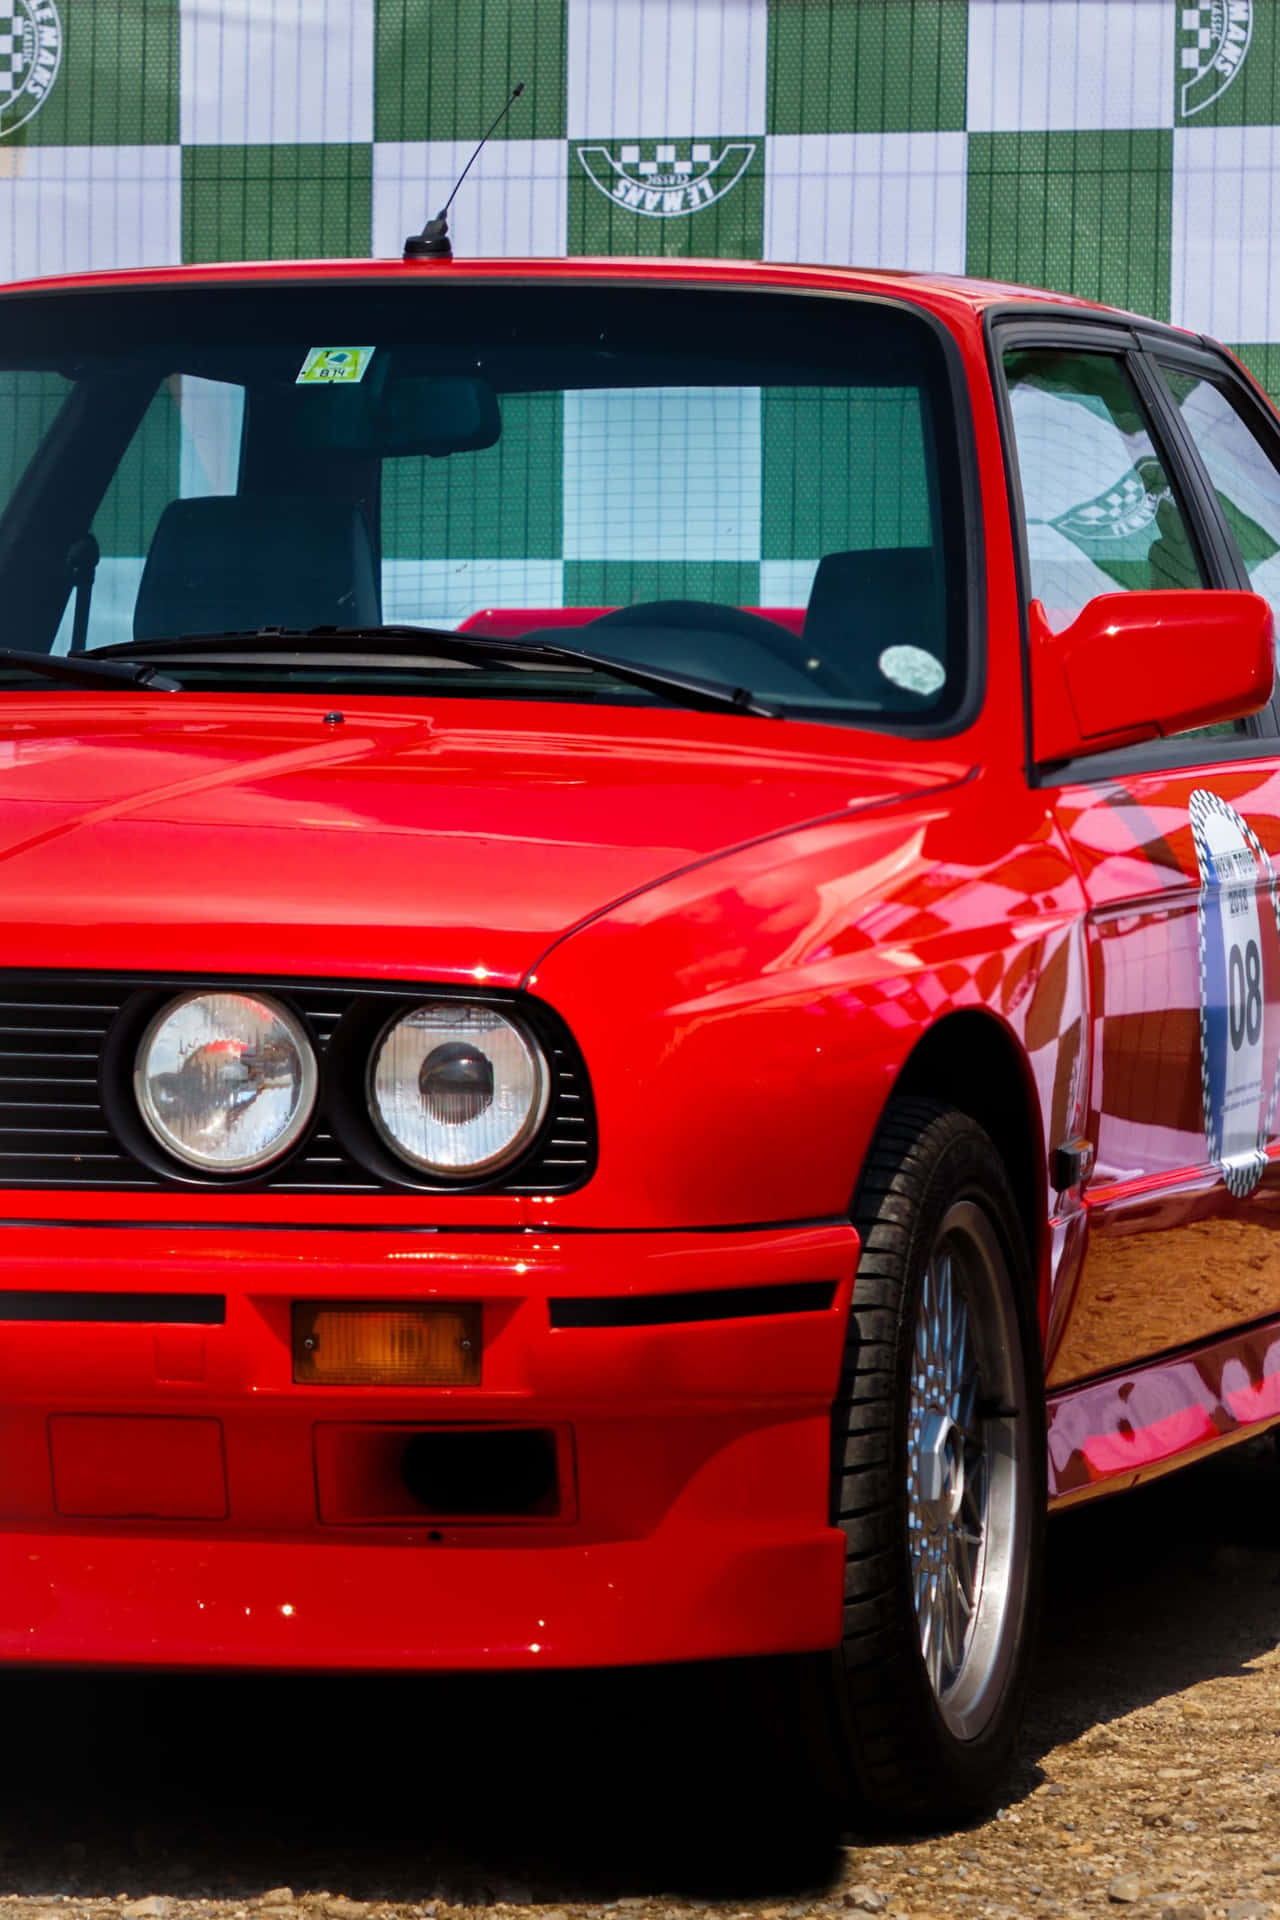 The Bmw E30 M3 Is A Car That Exudes Style And Performance Background